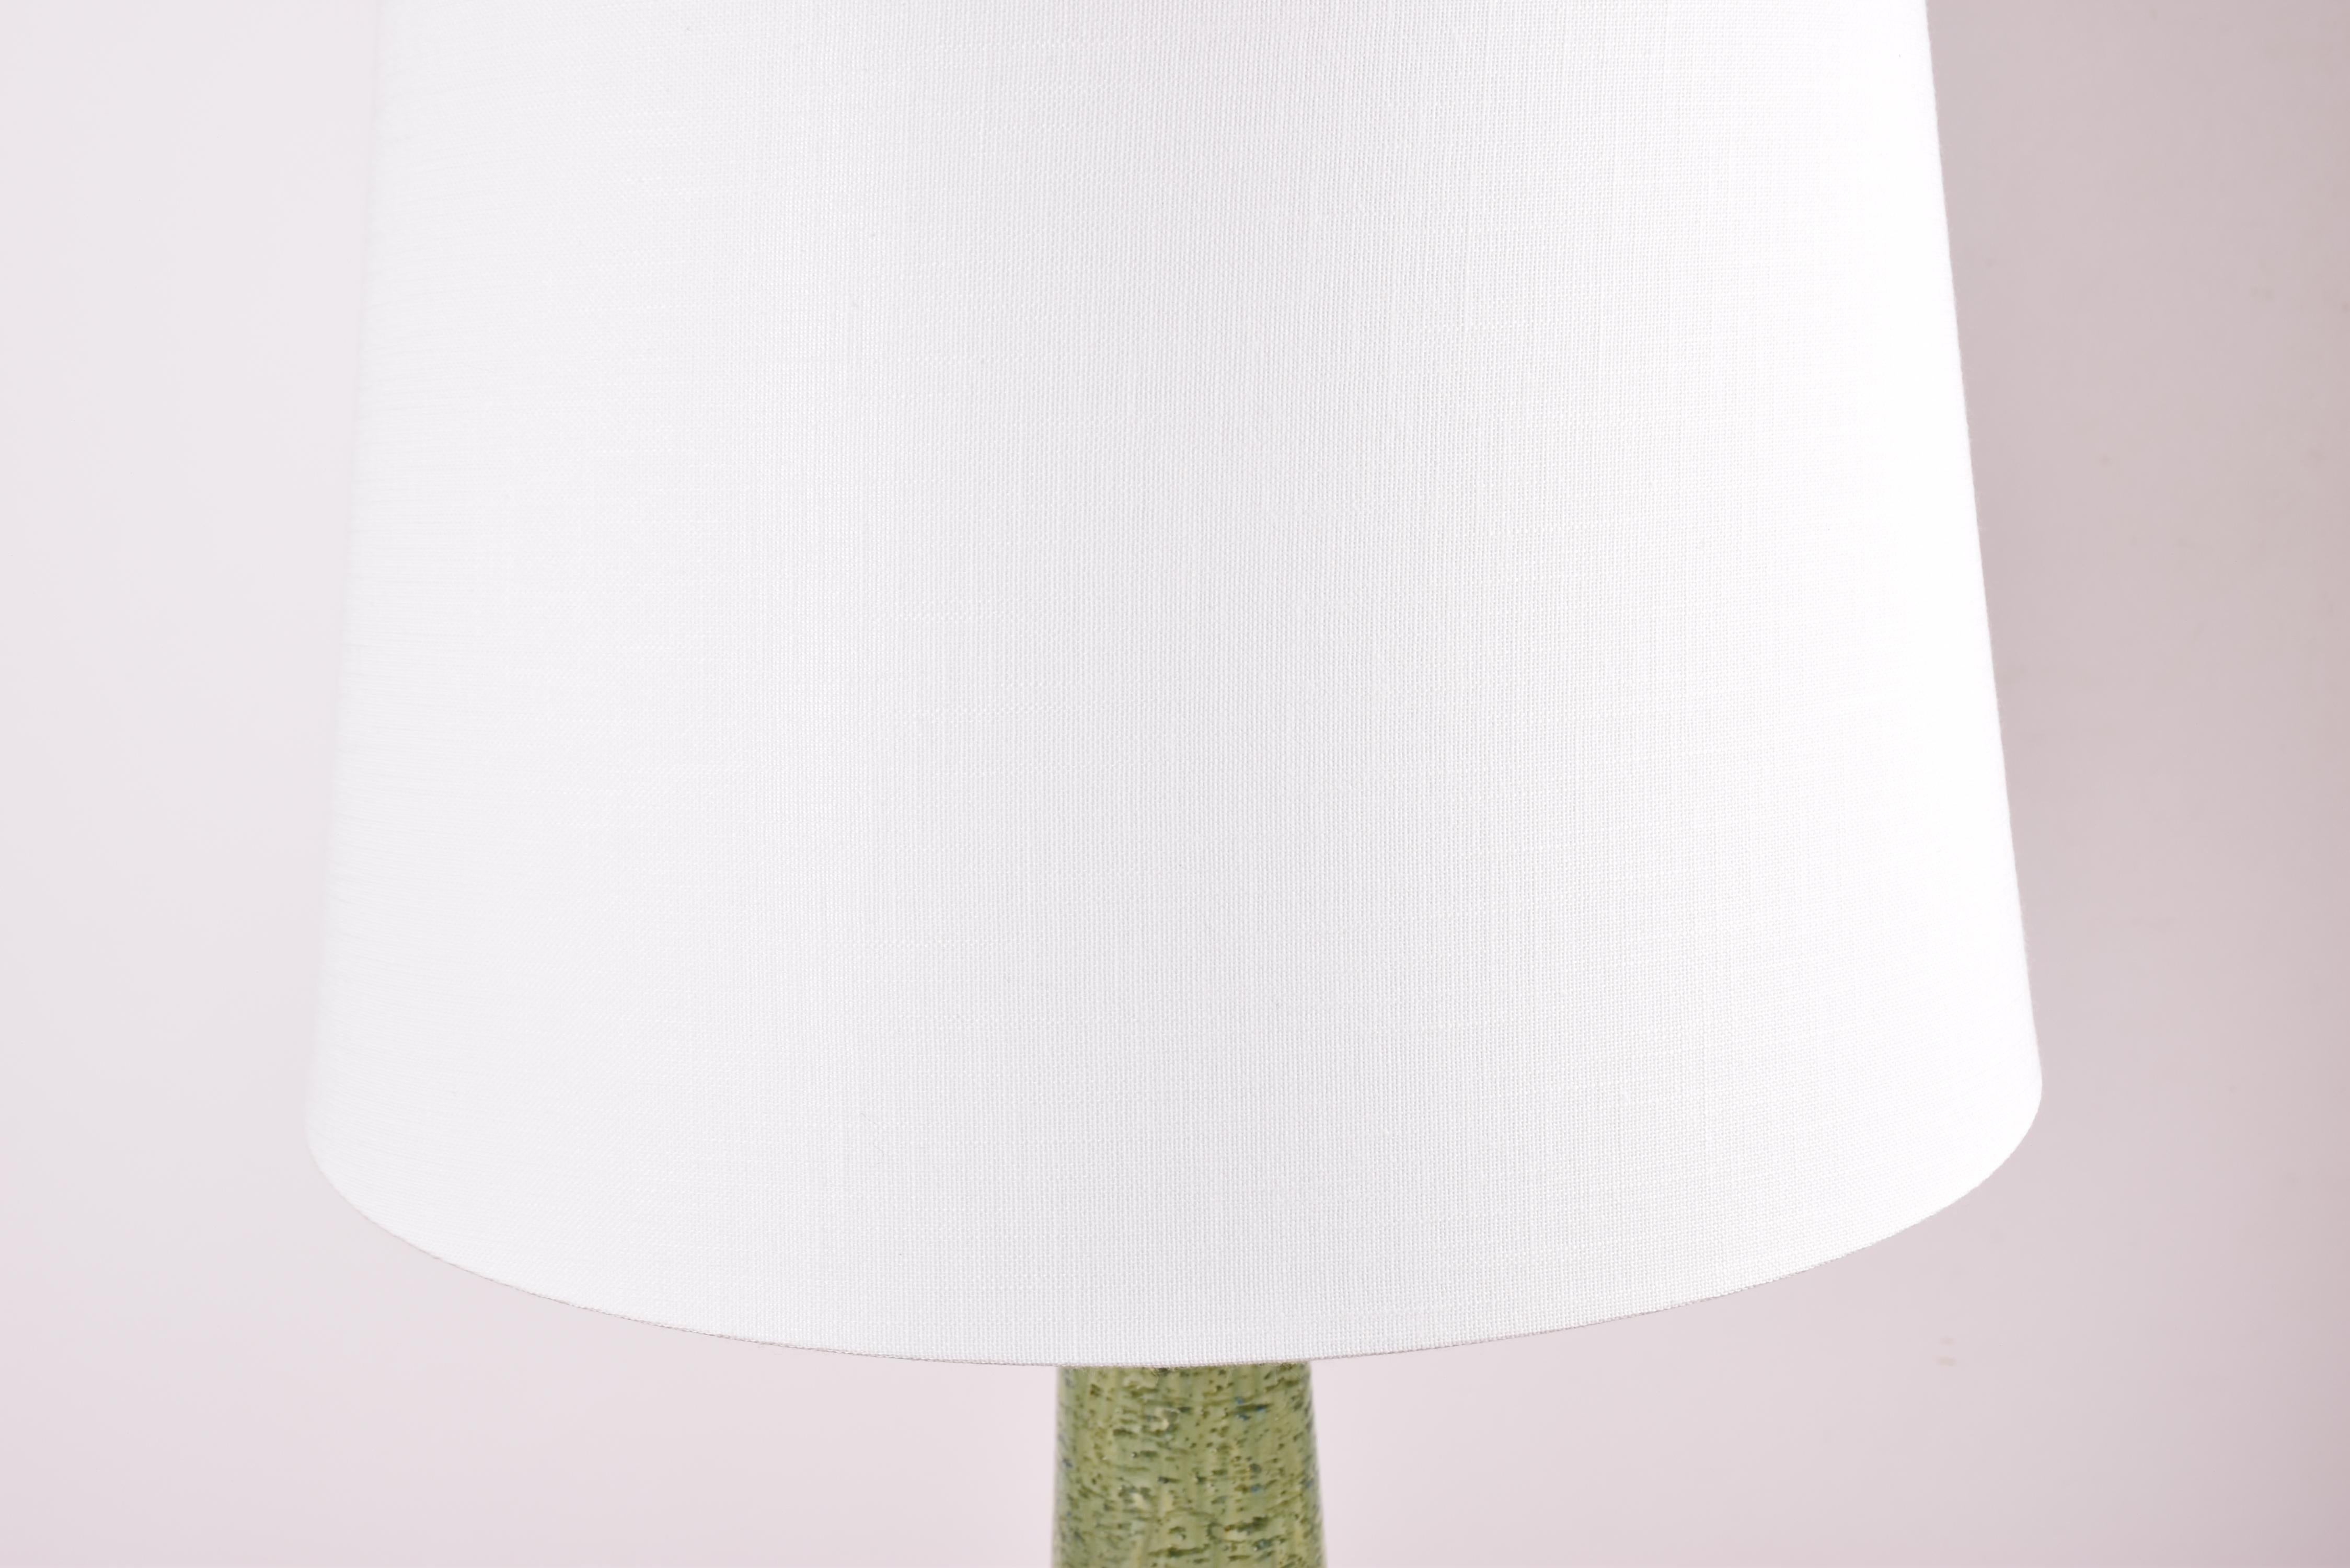 Danish Midcentury Palshus Tall Green Blue Table Lamp with New Lampshade, 1960s For Sale 2